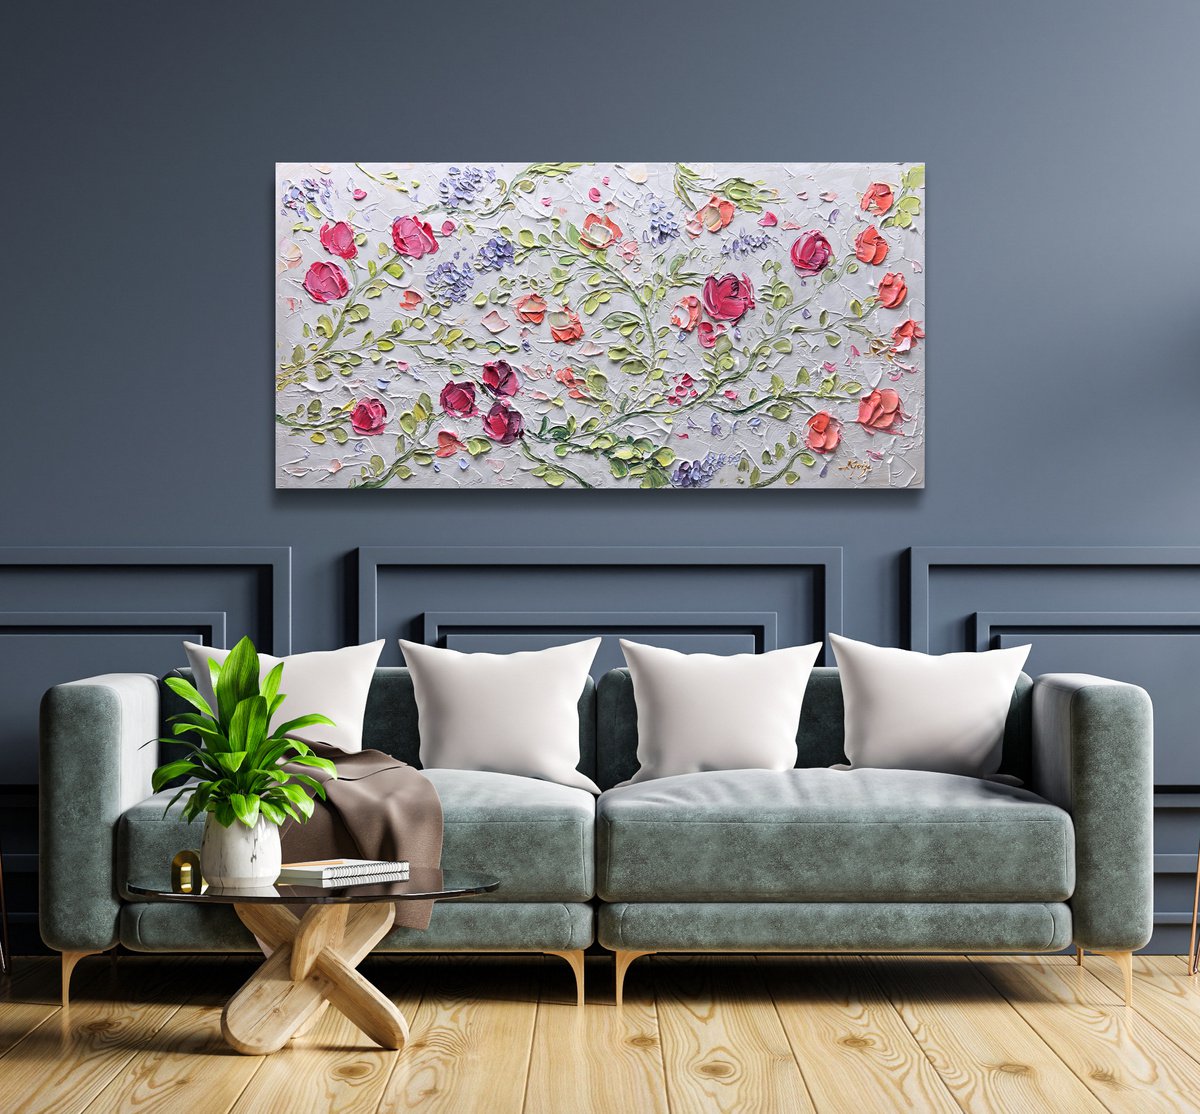 3D Textured Flowers Painting, Original Pink Rose, Heavy Textured Flower Painting Decor Liv... by Lana Guise